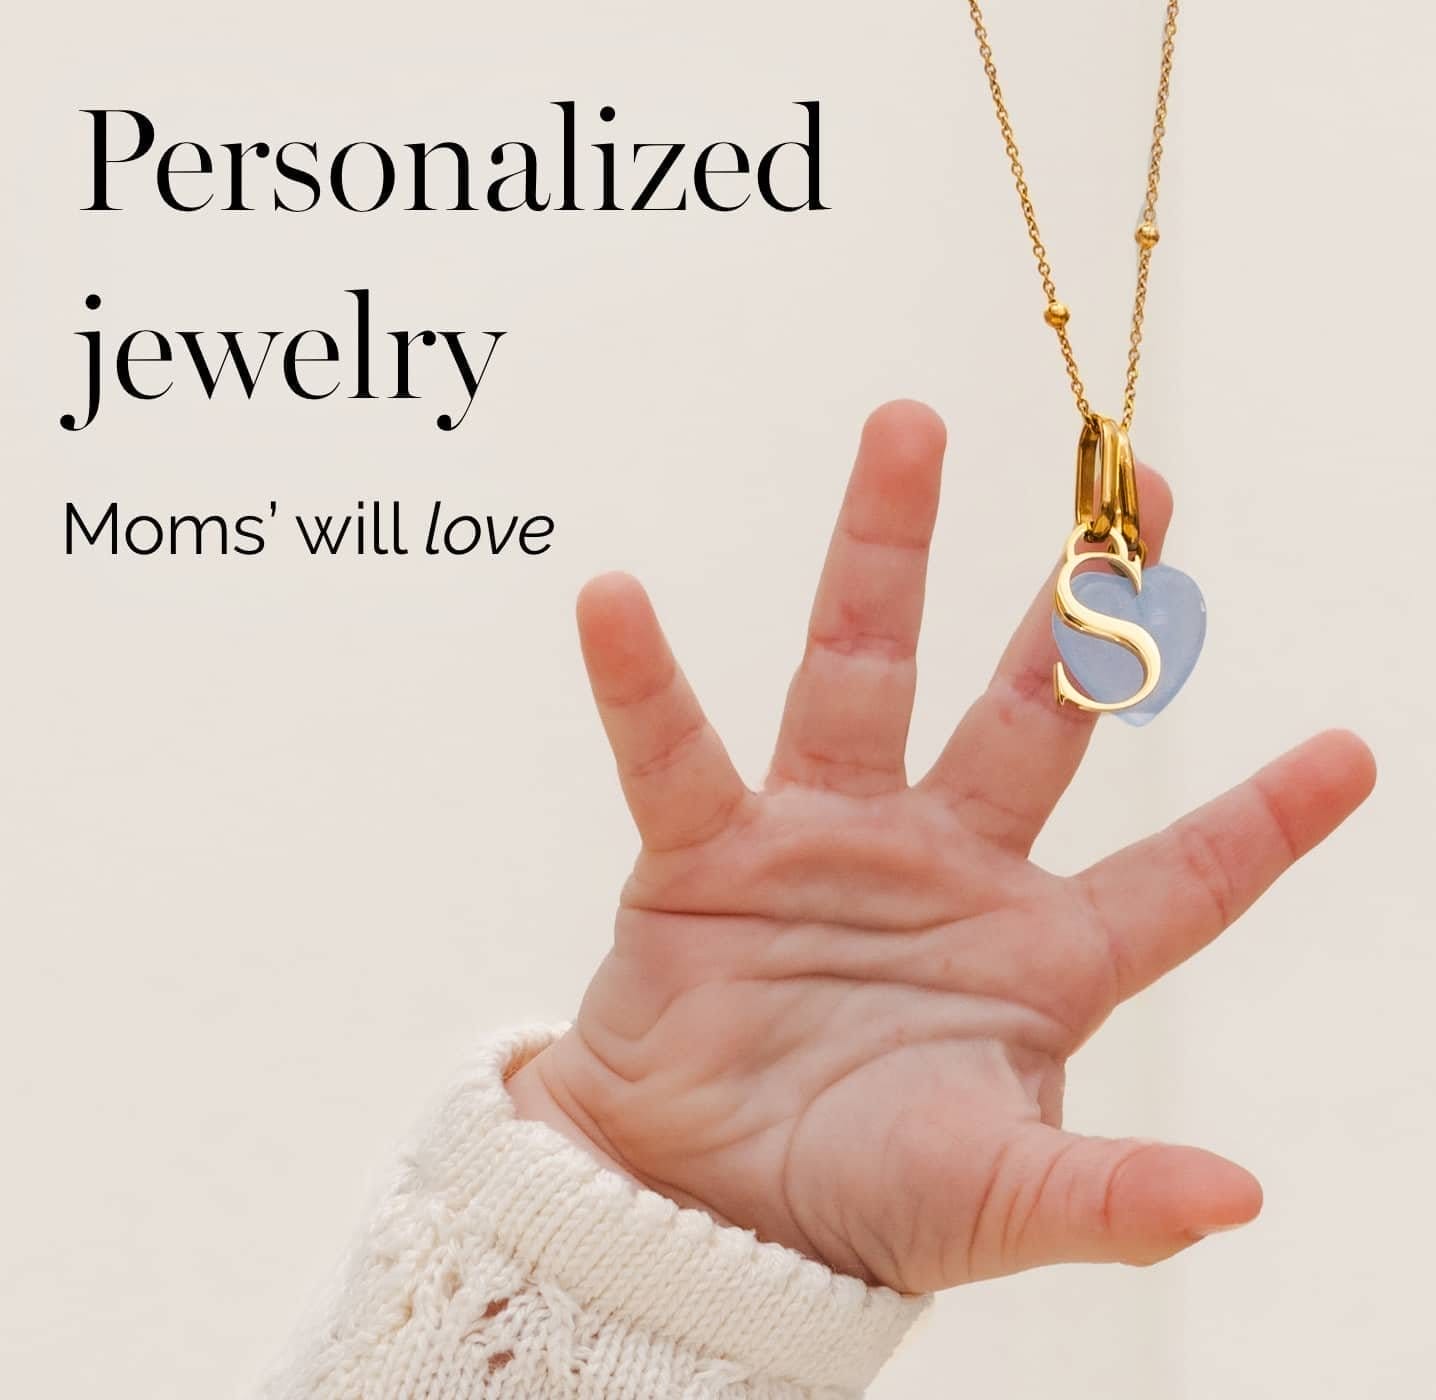 Personalised jewelry